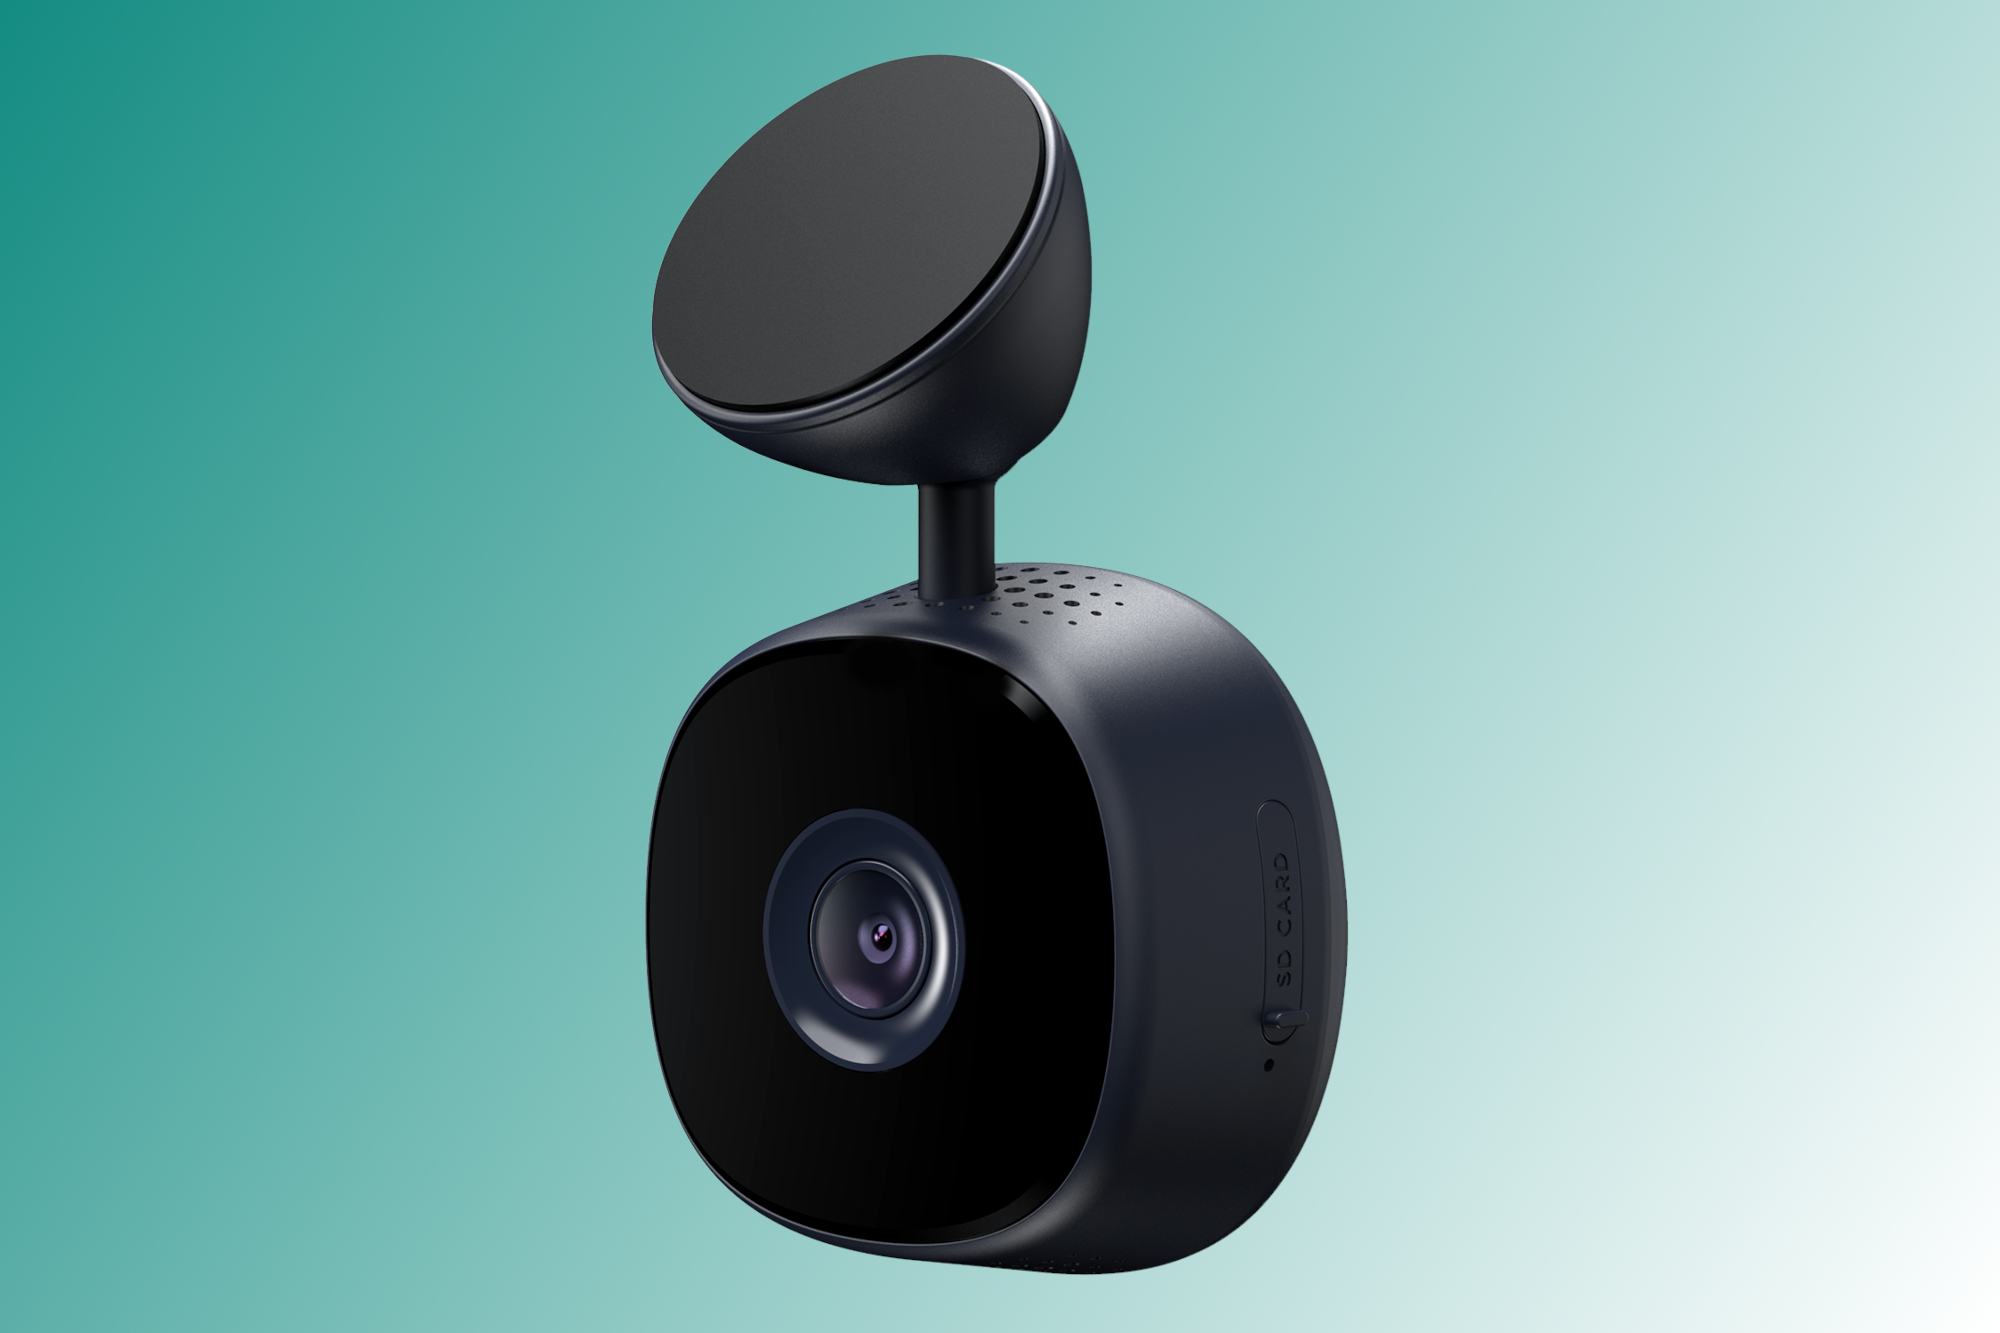 iOttie Aivo View - Most stealth front-only cam